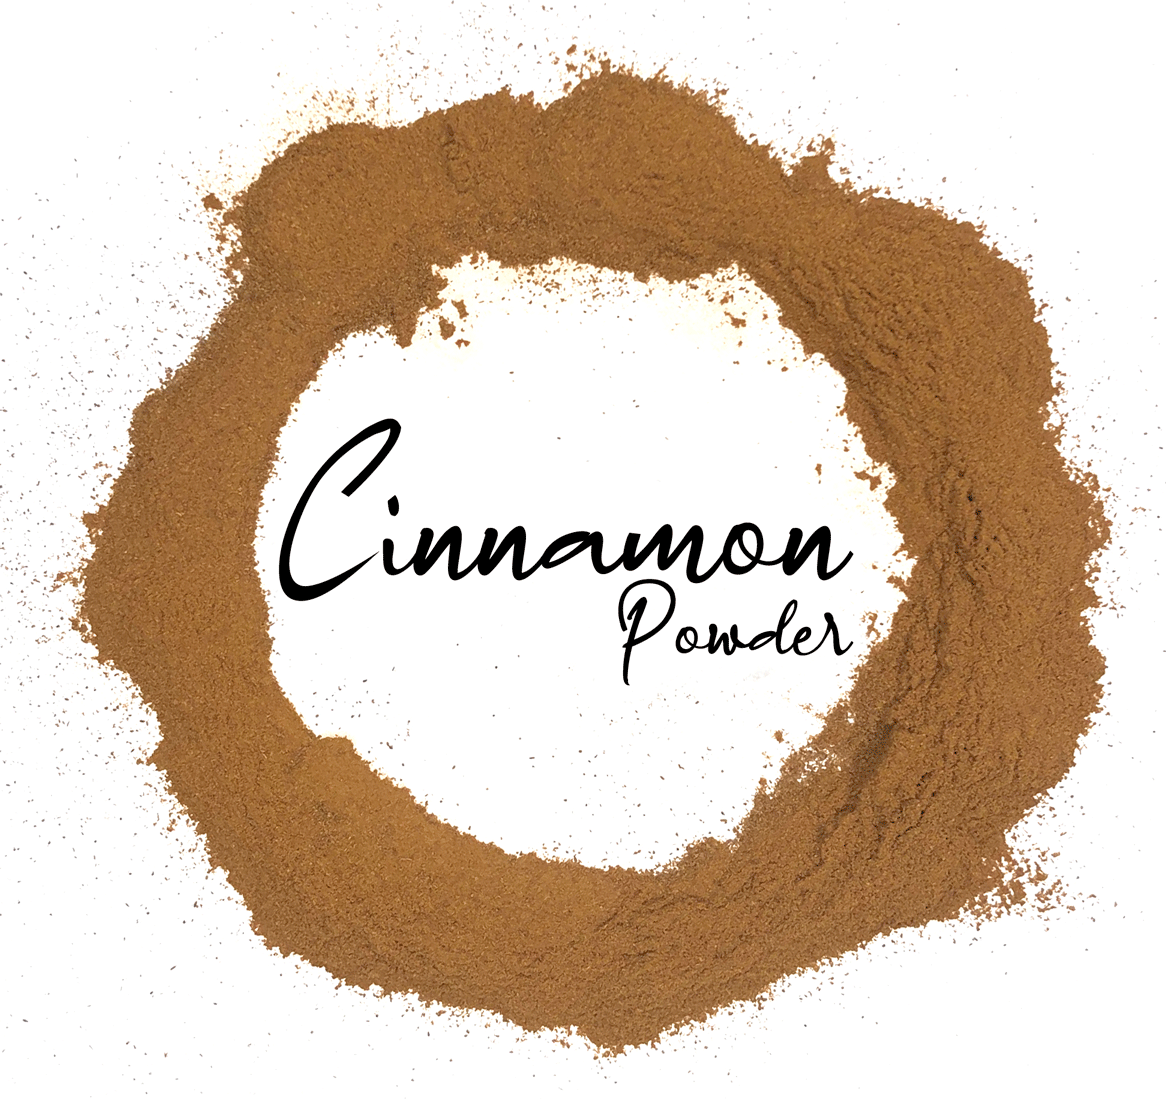 Buy Organic Cinnamon Powder packaged in the USA.